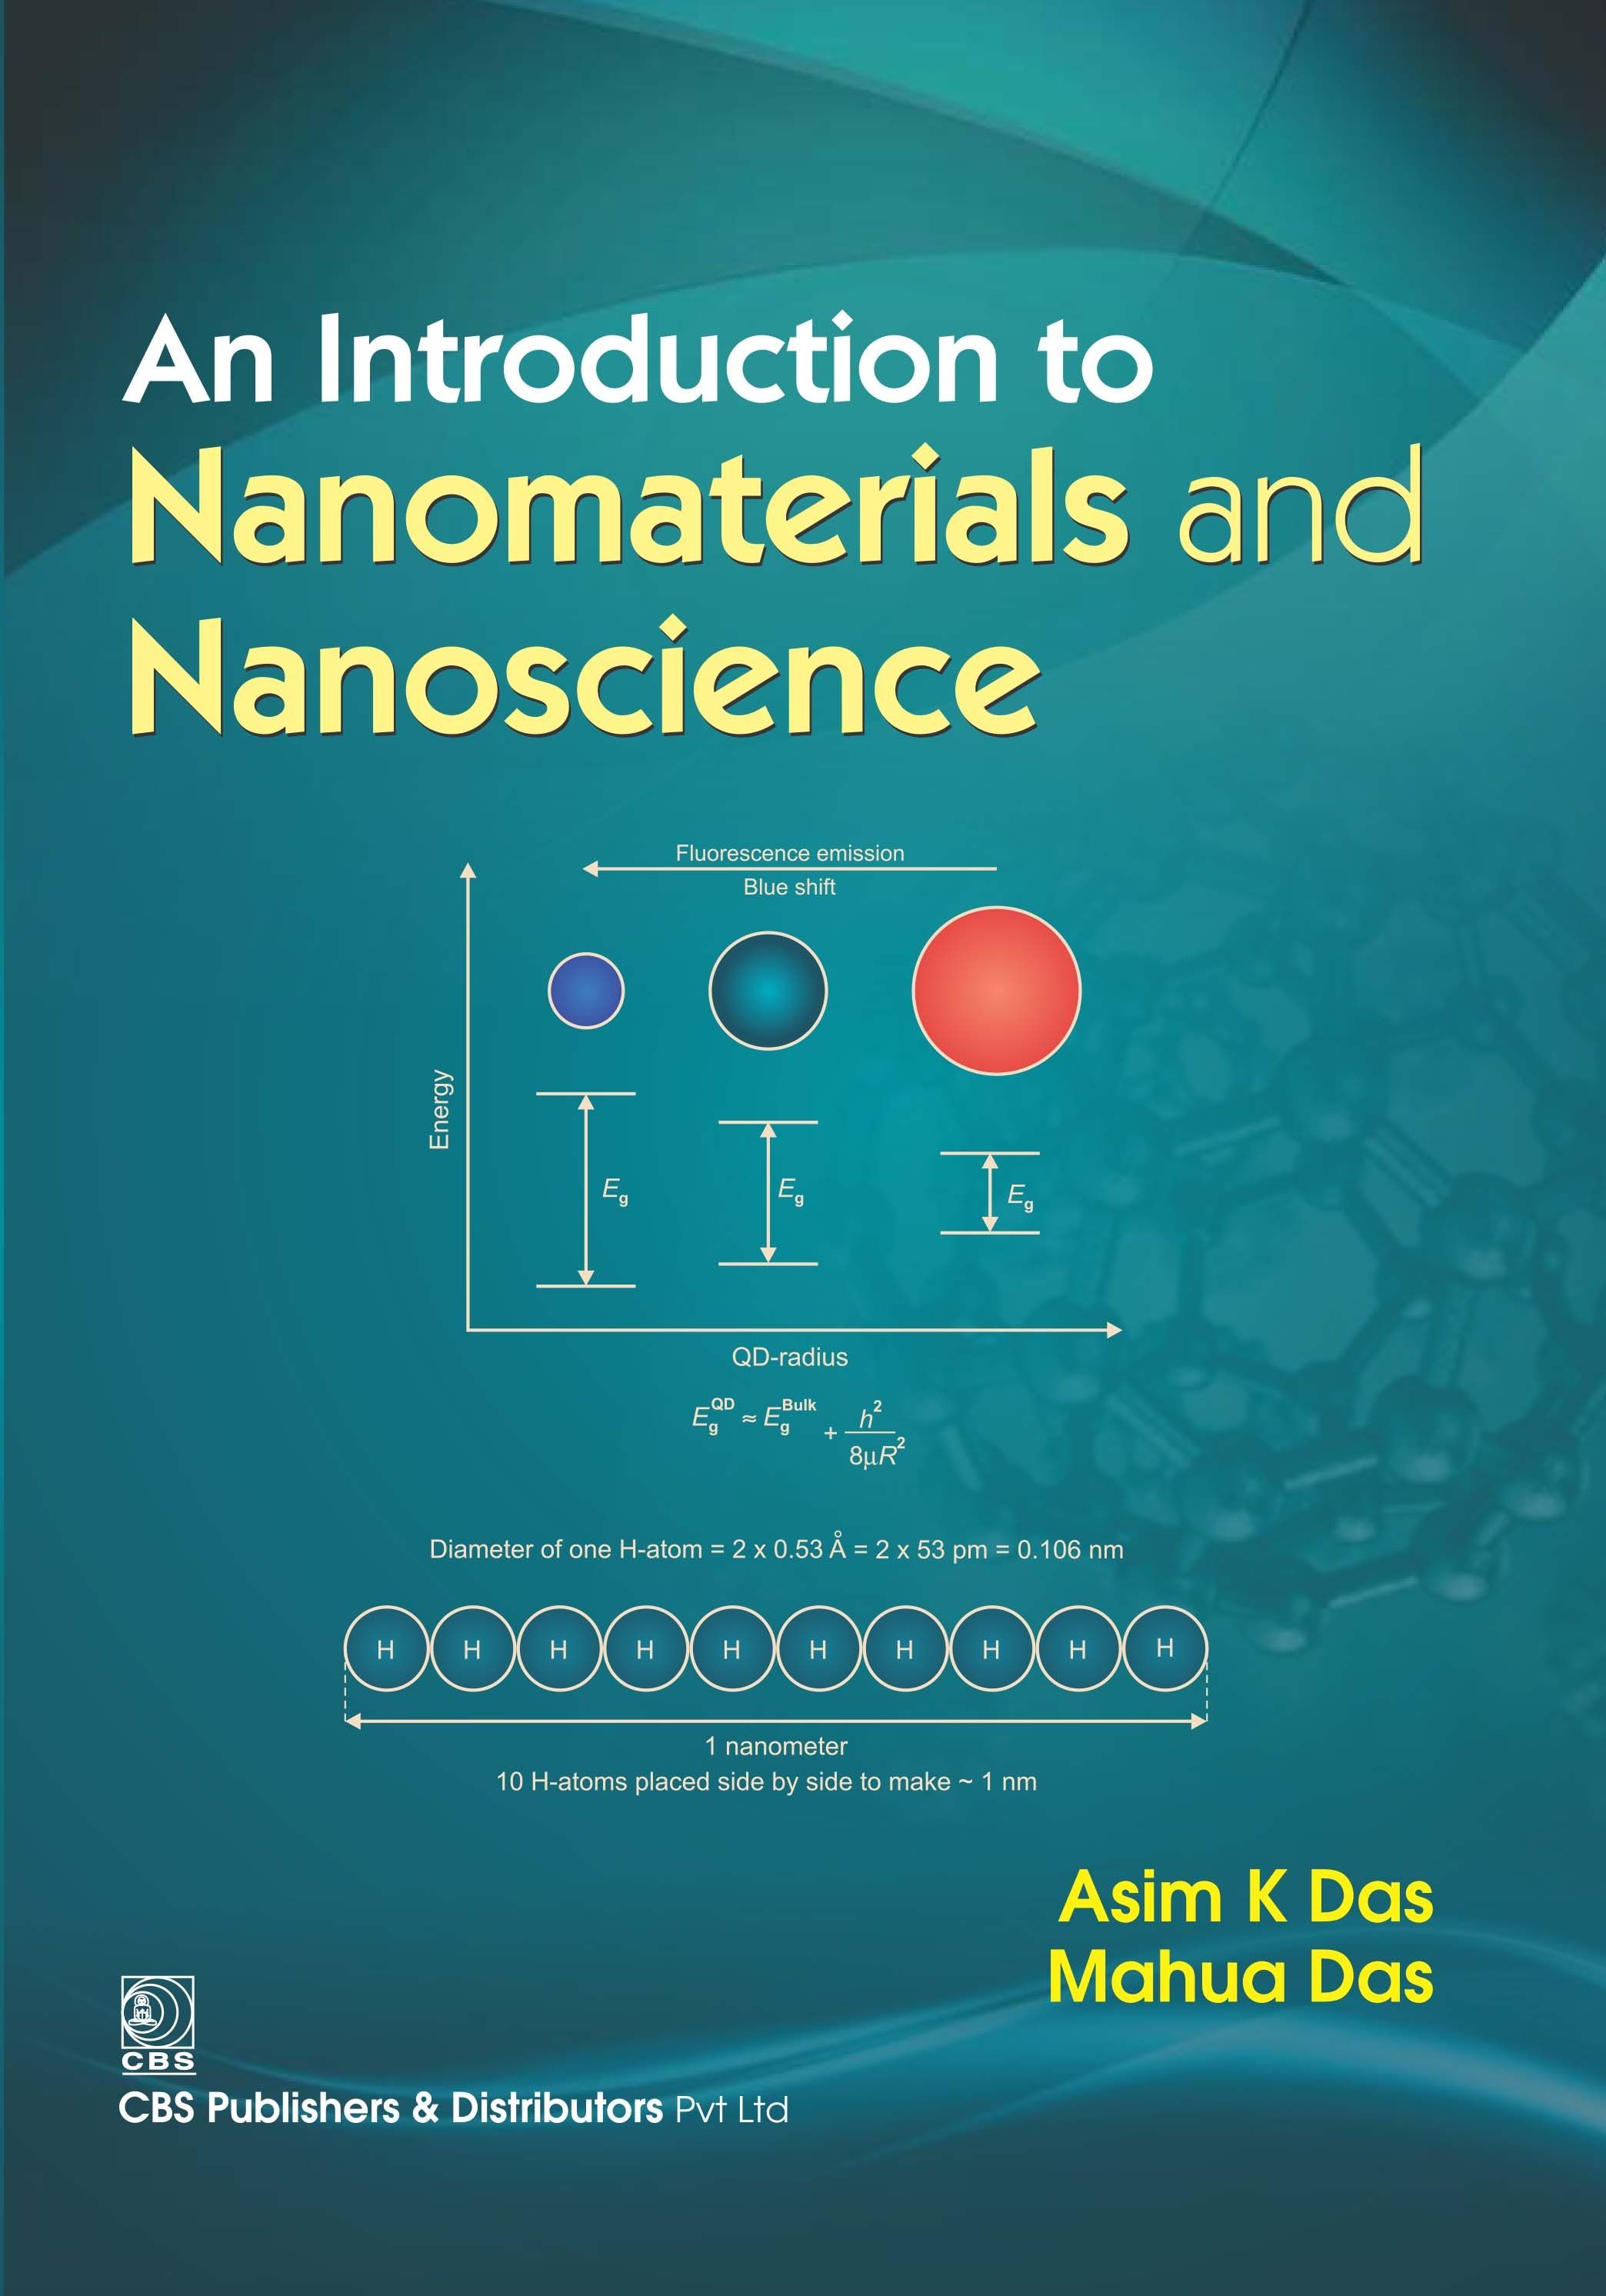 An Introduction to Nanomaterials and Nanoscience, 1st reprint